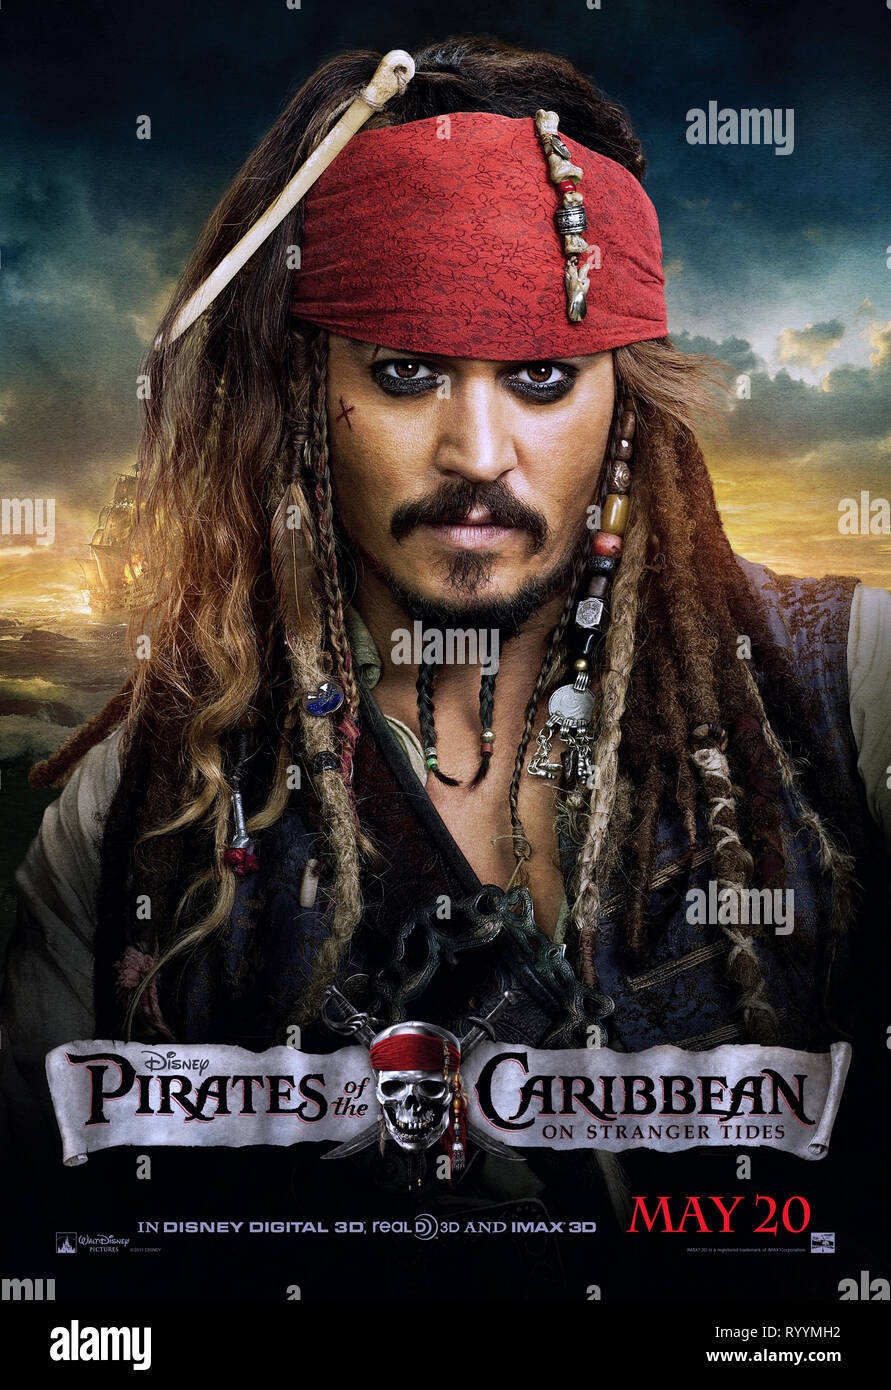 Pirates Of The Caribbean Poster Stock Photos & Pirates Of The ...